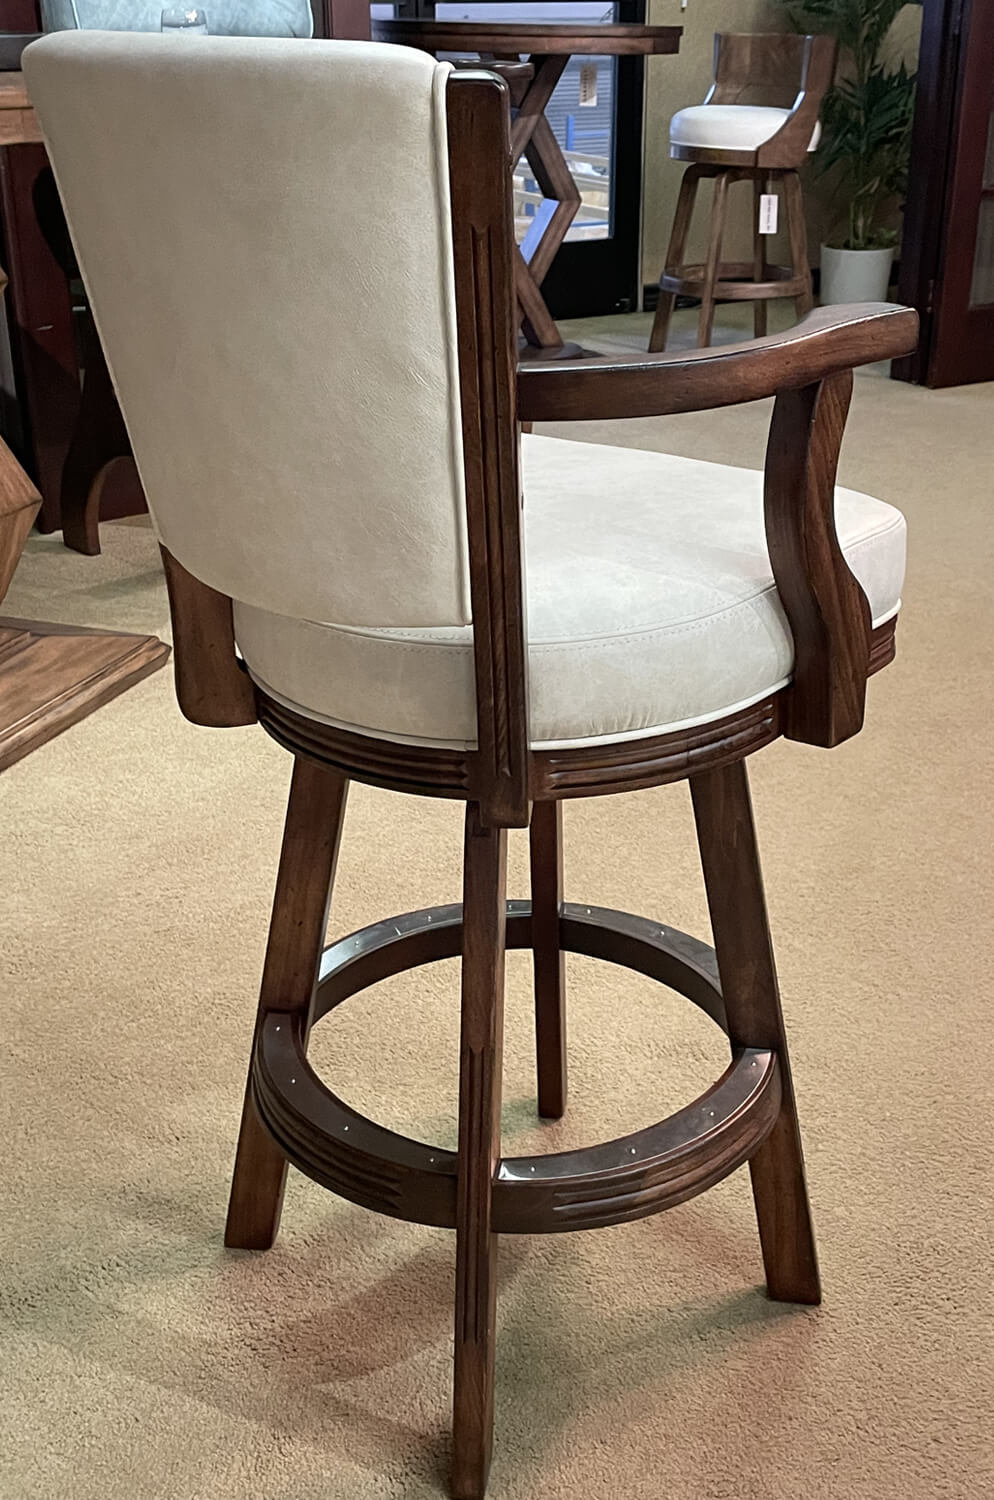 Darafeev's 960 Maple Wood Swivel Bar Stool Upholstered Solid Back and Seat with Arms - Back VIew